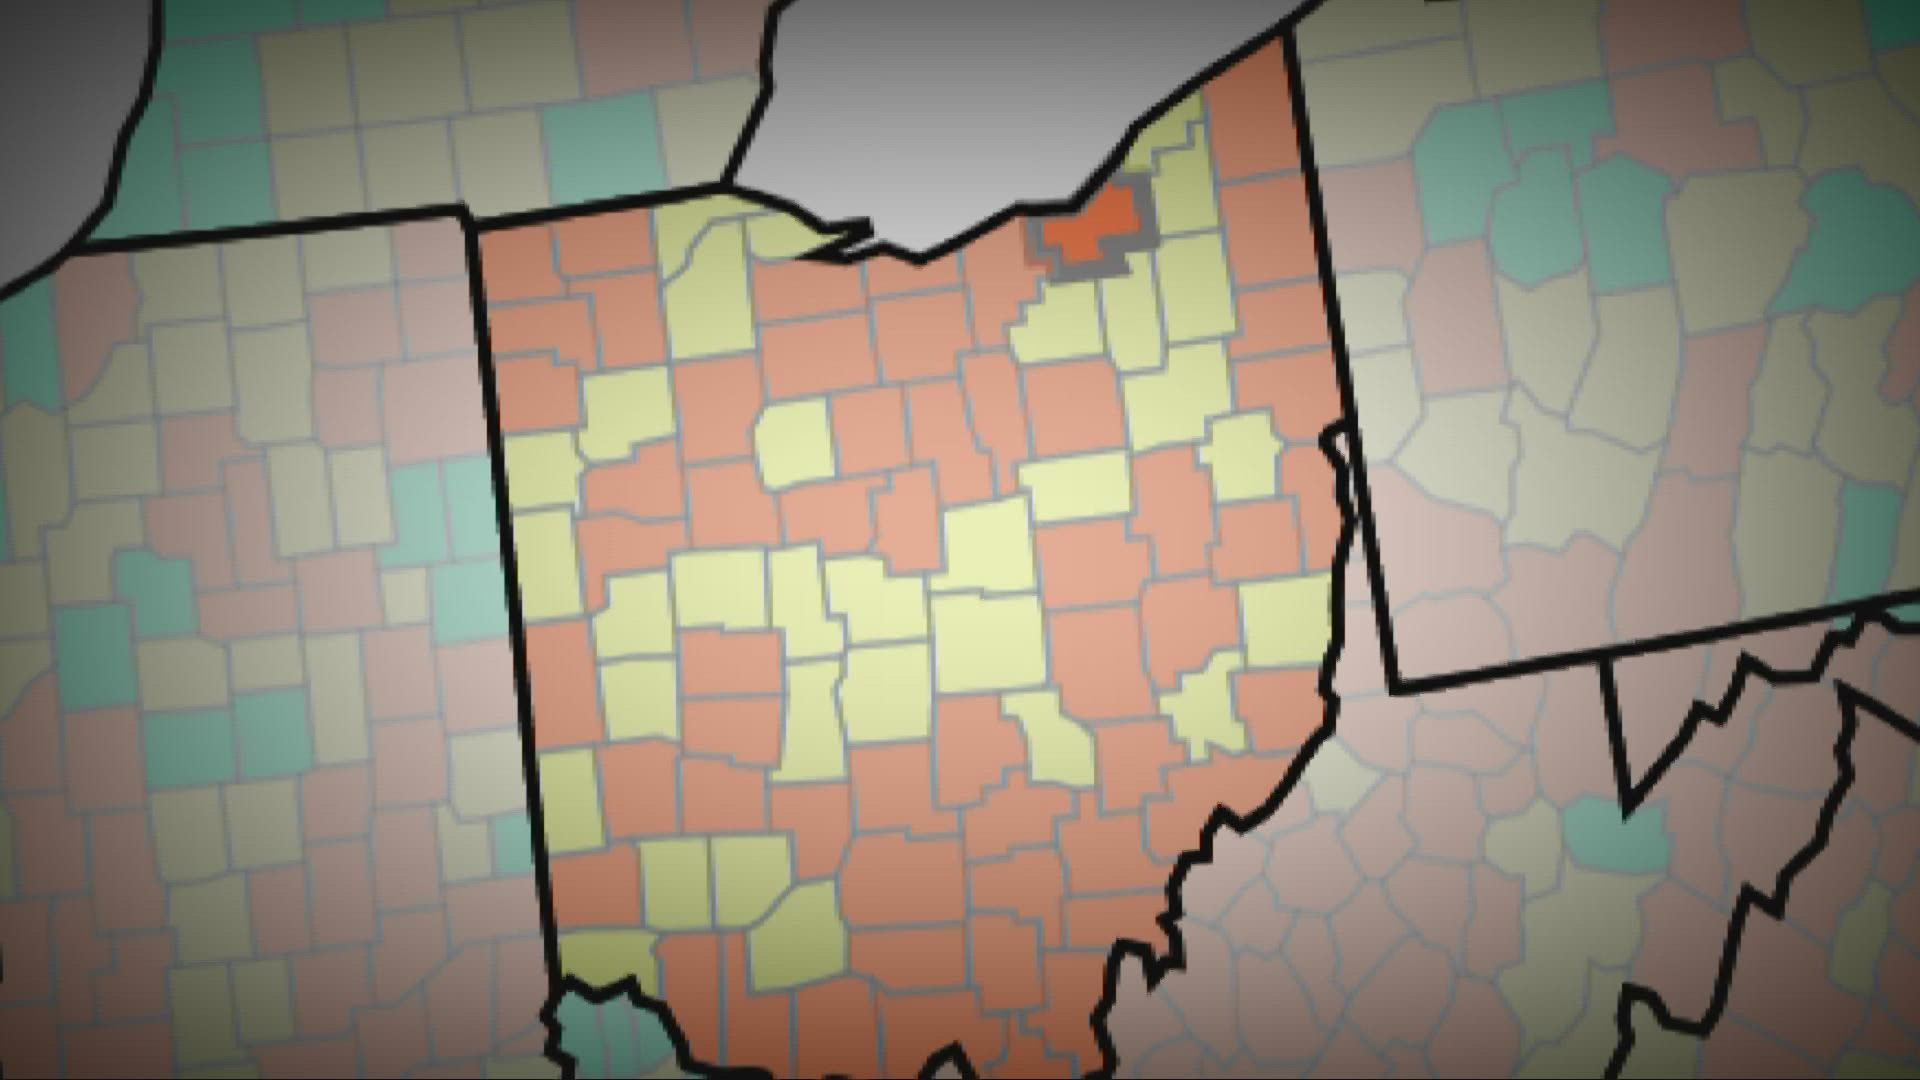 The CDC provided updates on COVID-19 community levels in Ohio on Thursday, as well as its investigation into the E. coli outbreak.